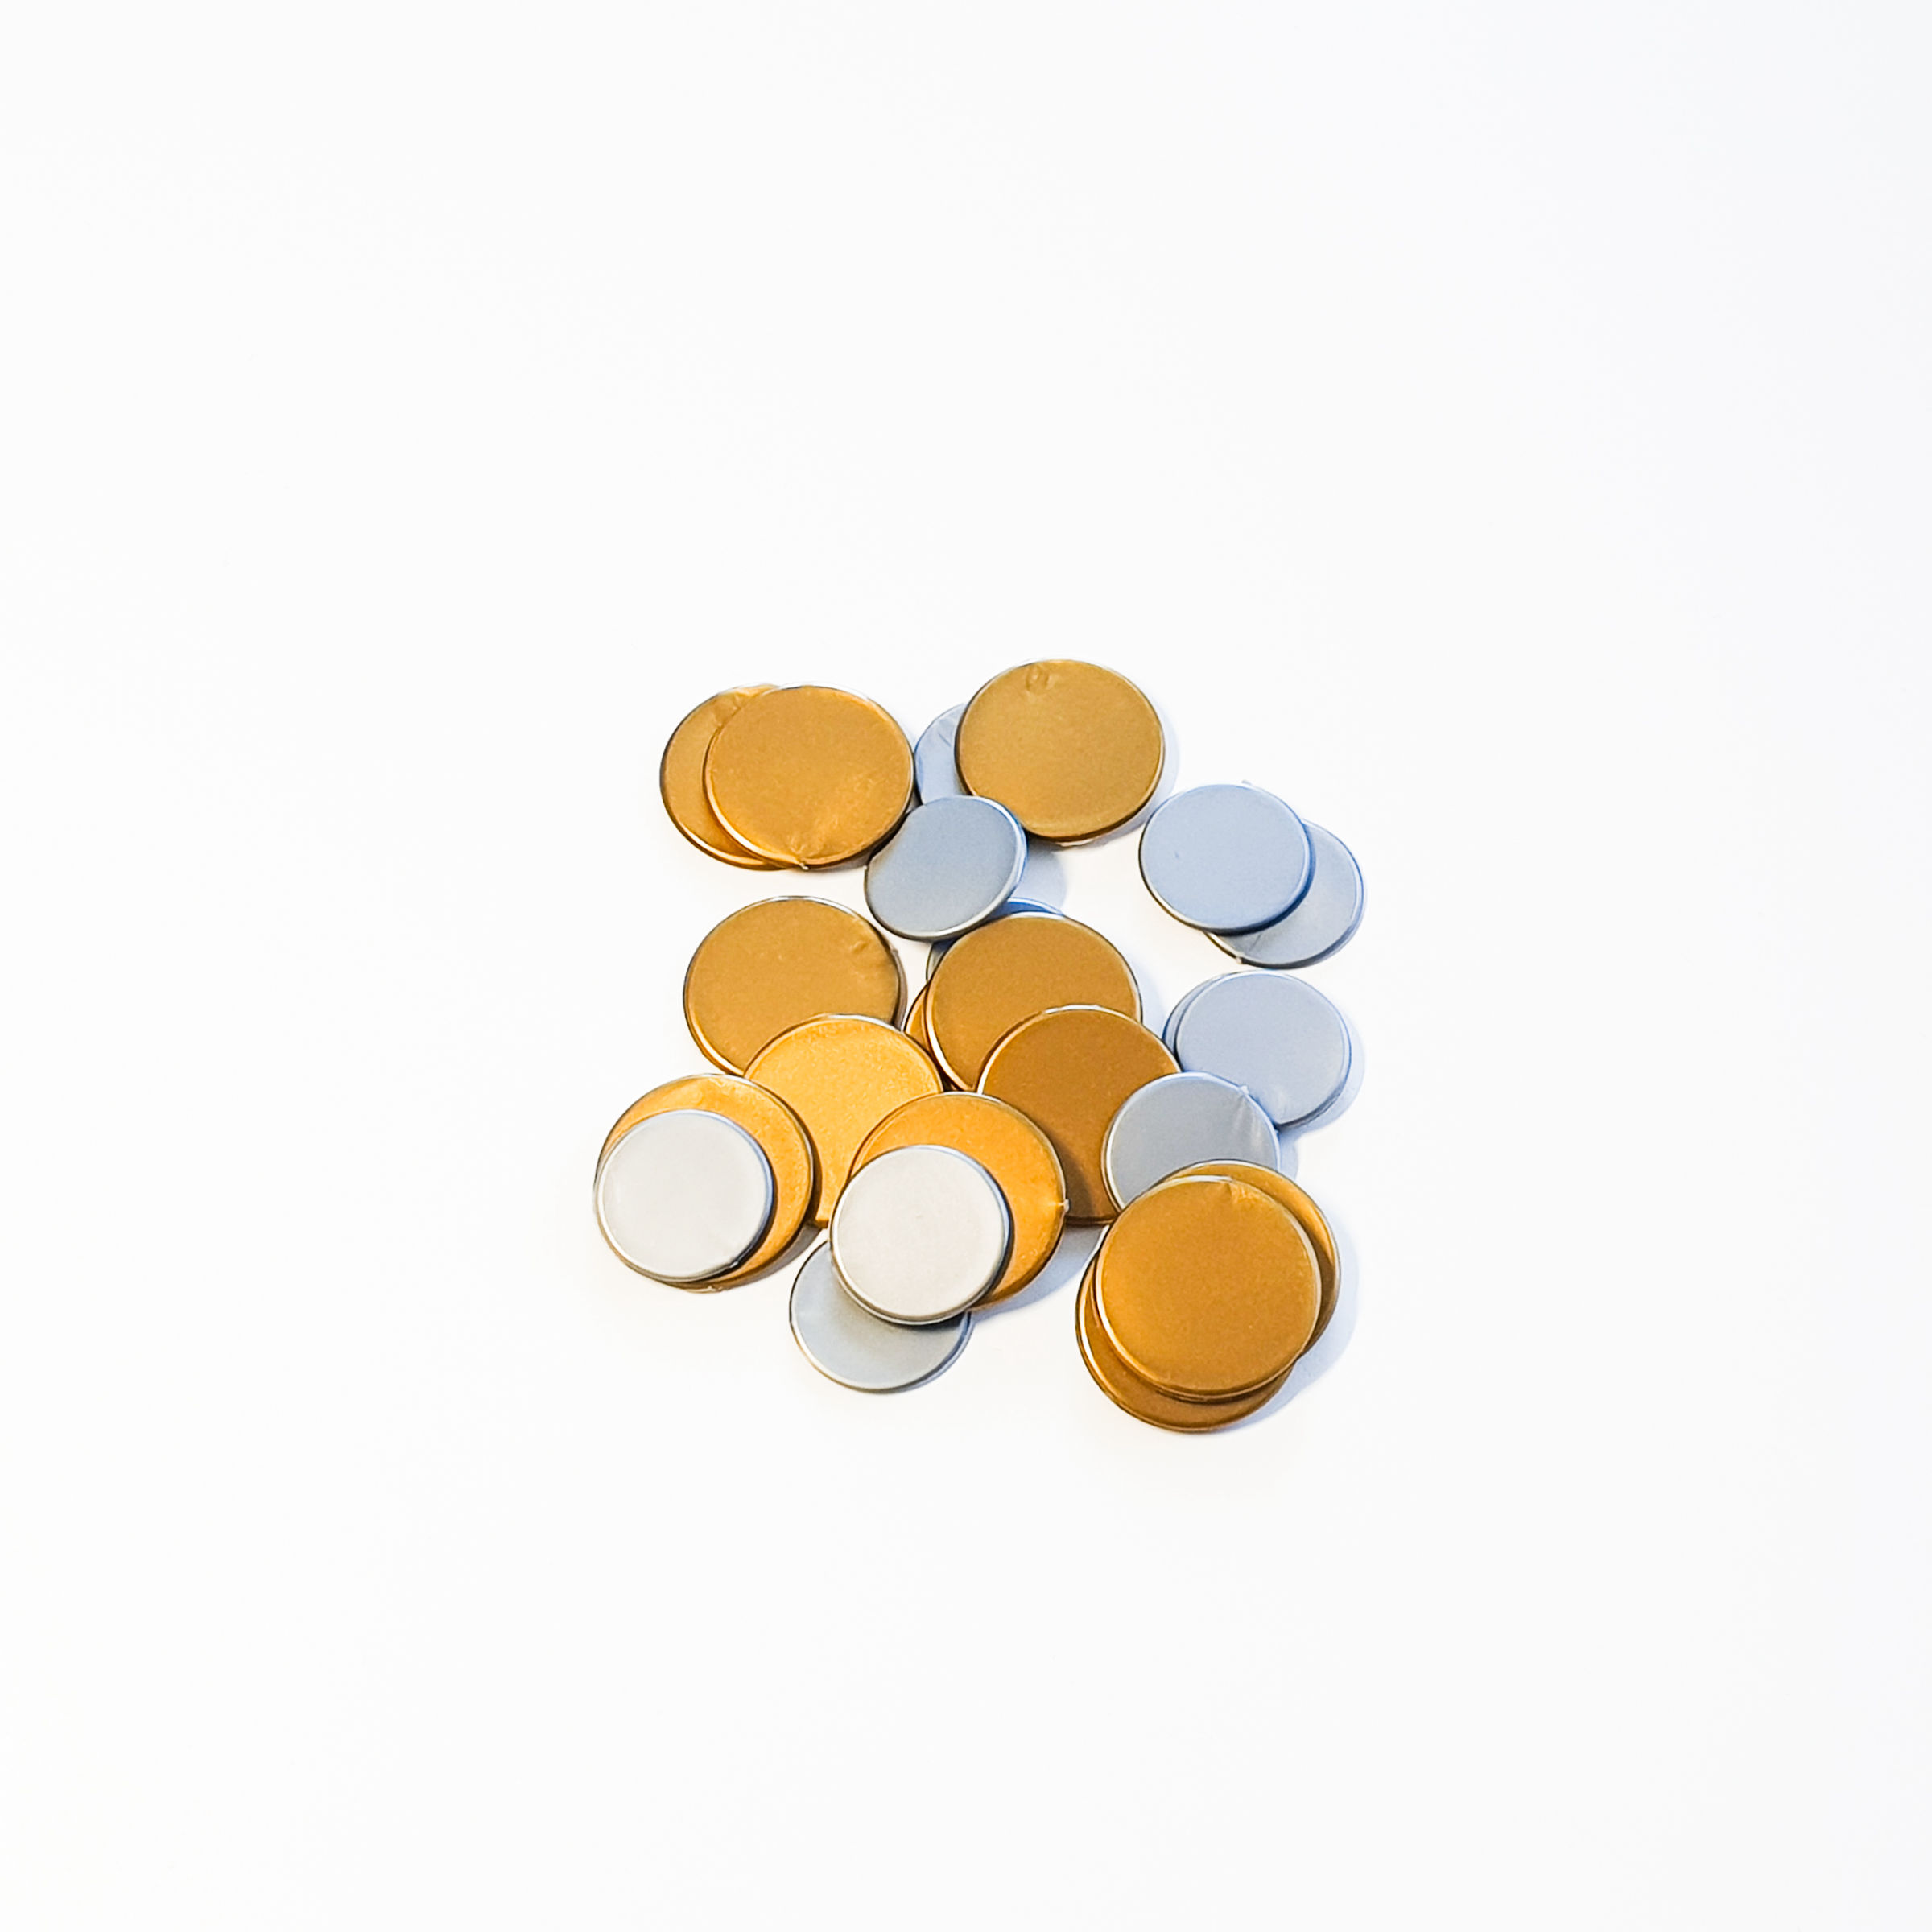 Plastic coin tokens in gold and silver colours